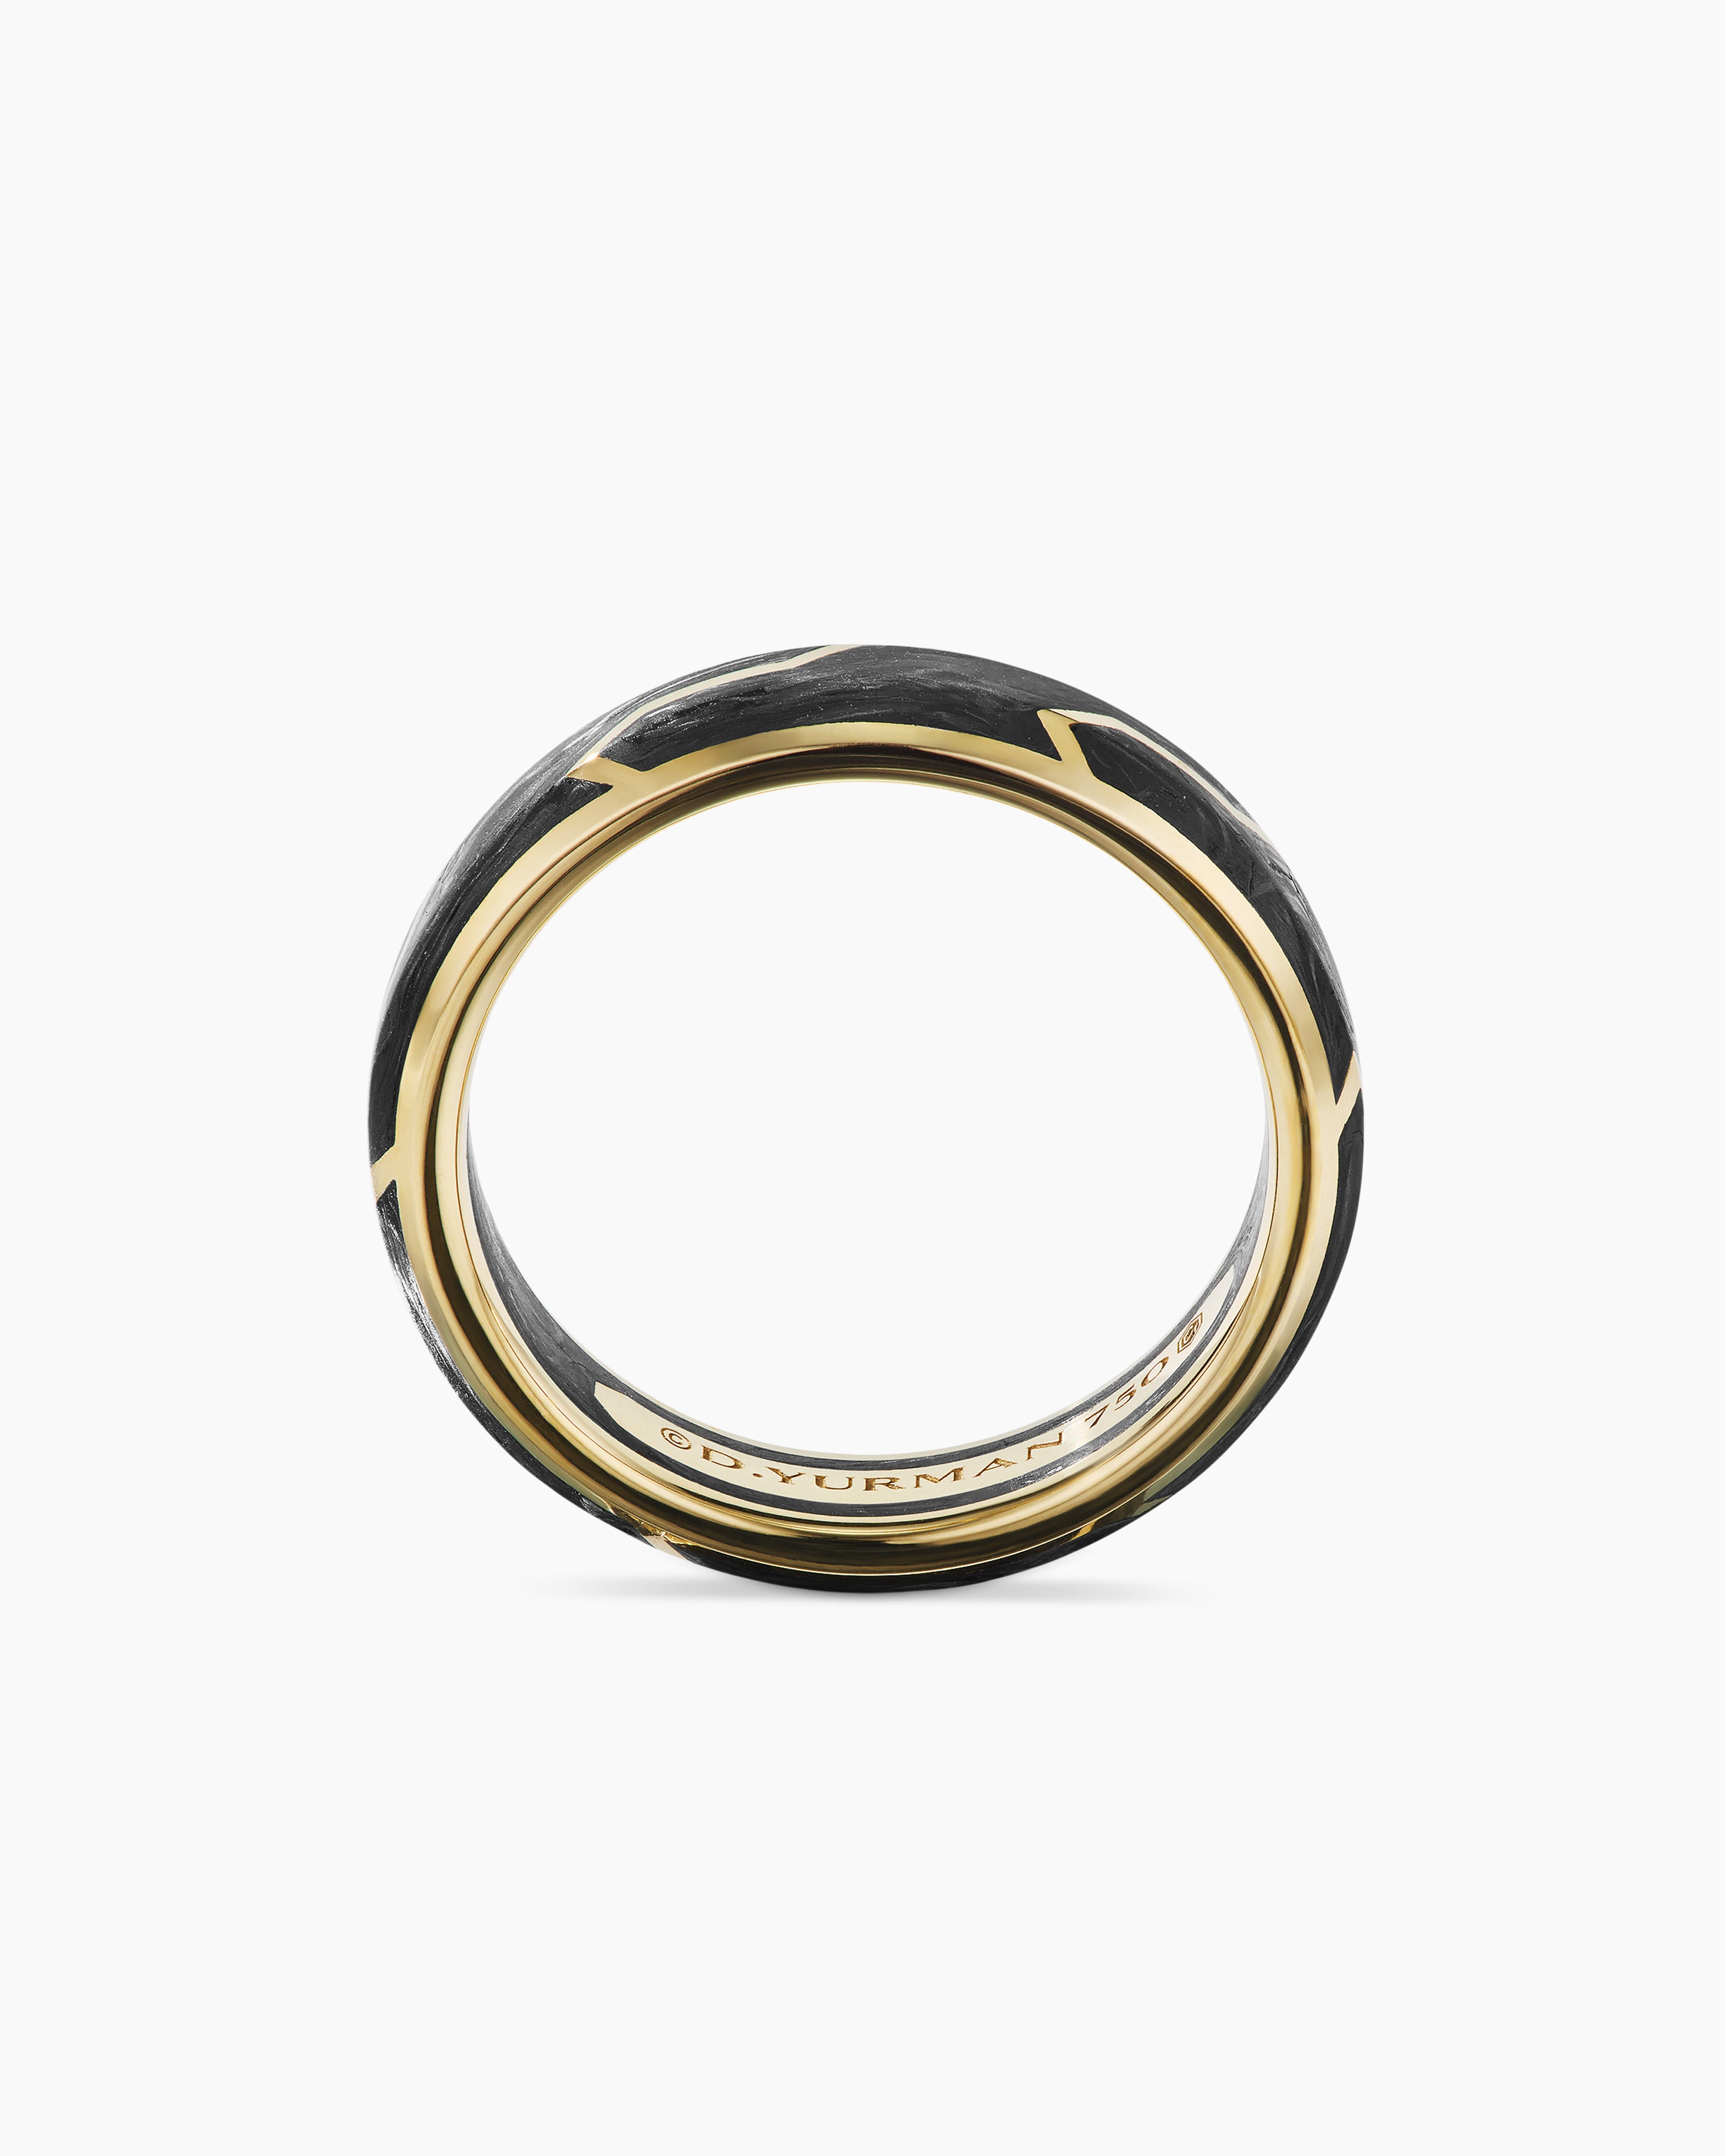 Shop for and Buy Brass Circle with 3 Removable Key Rings at